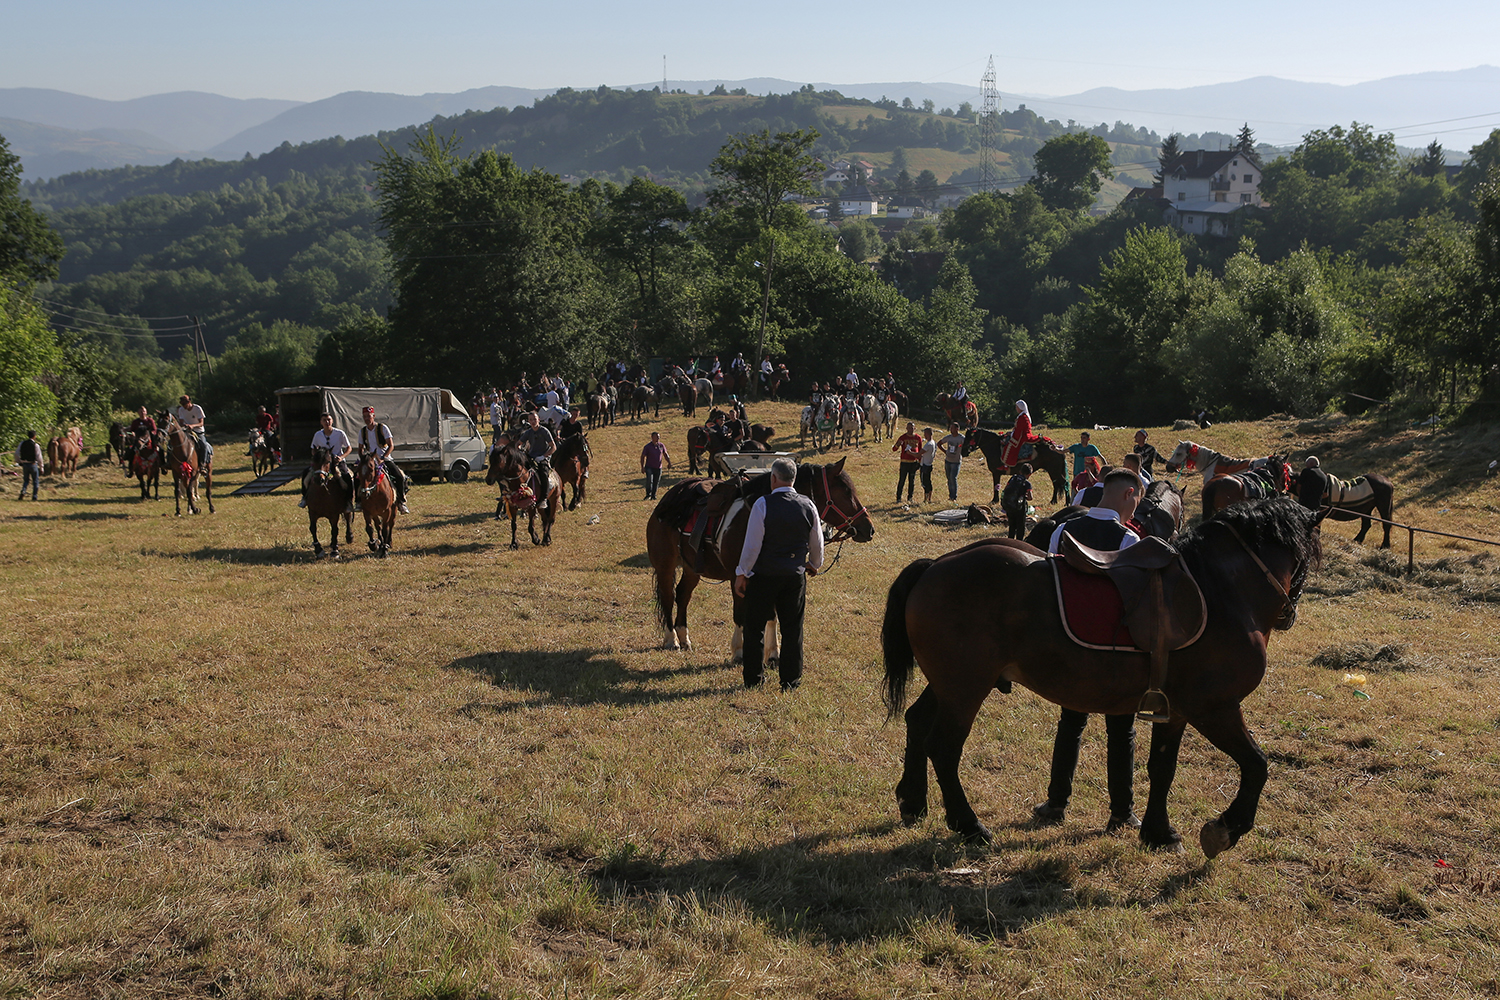 Horses in the field are prepared for the grand procession (photo: Konstantin Novakovic)